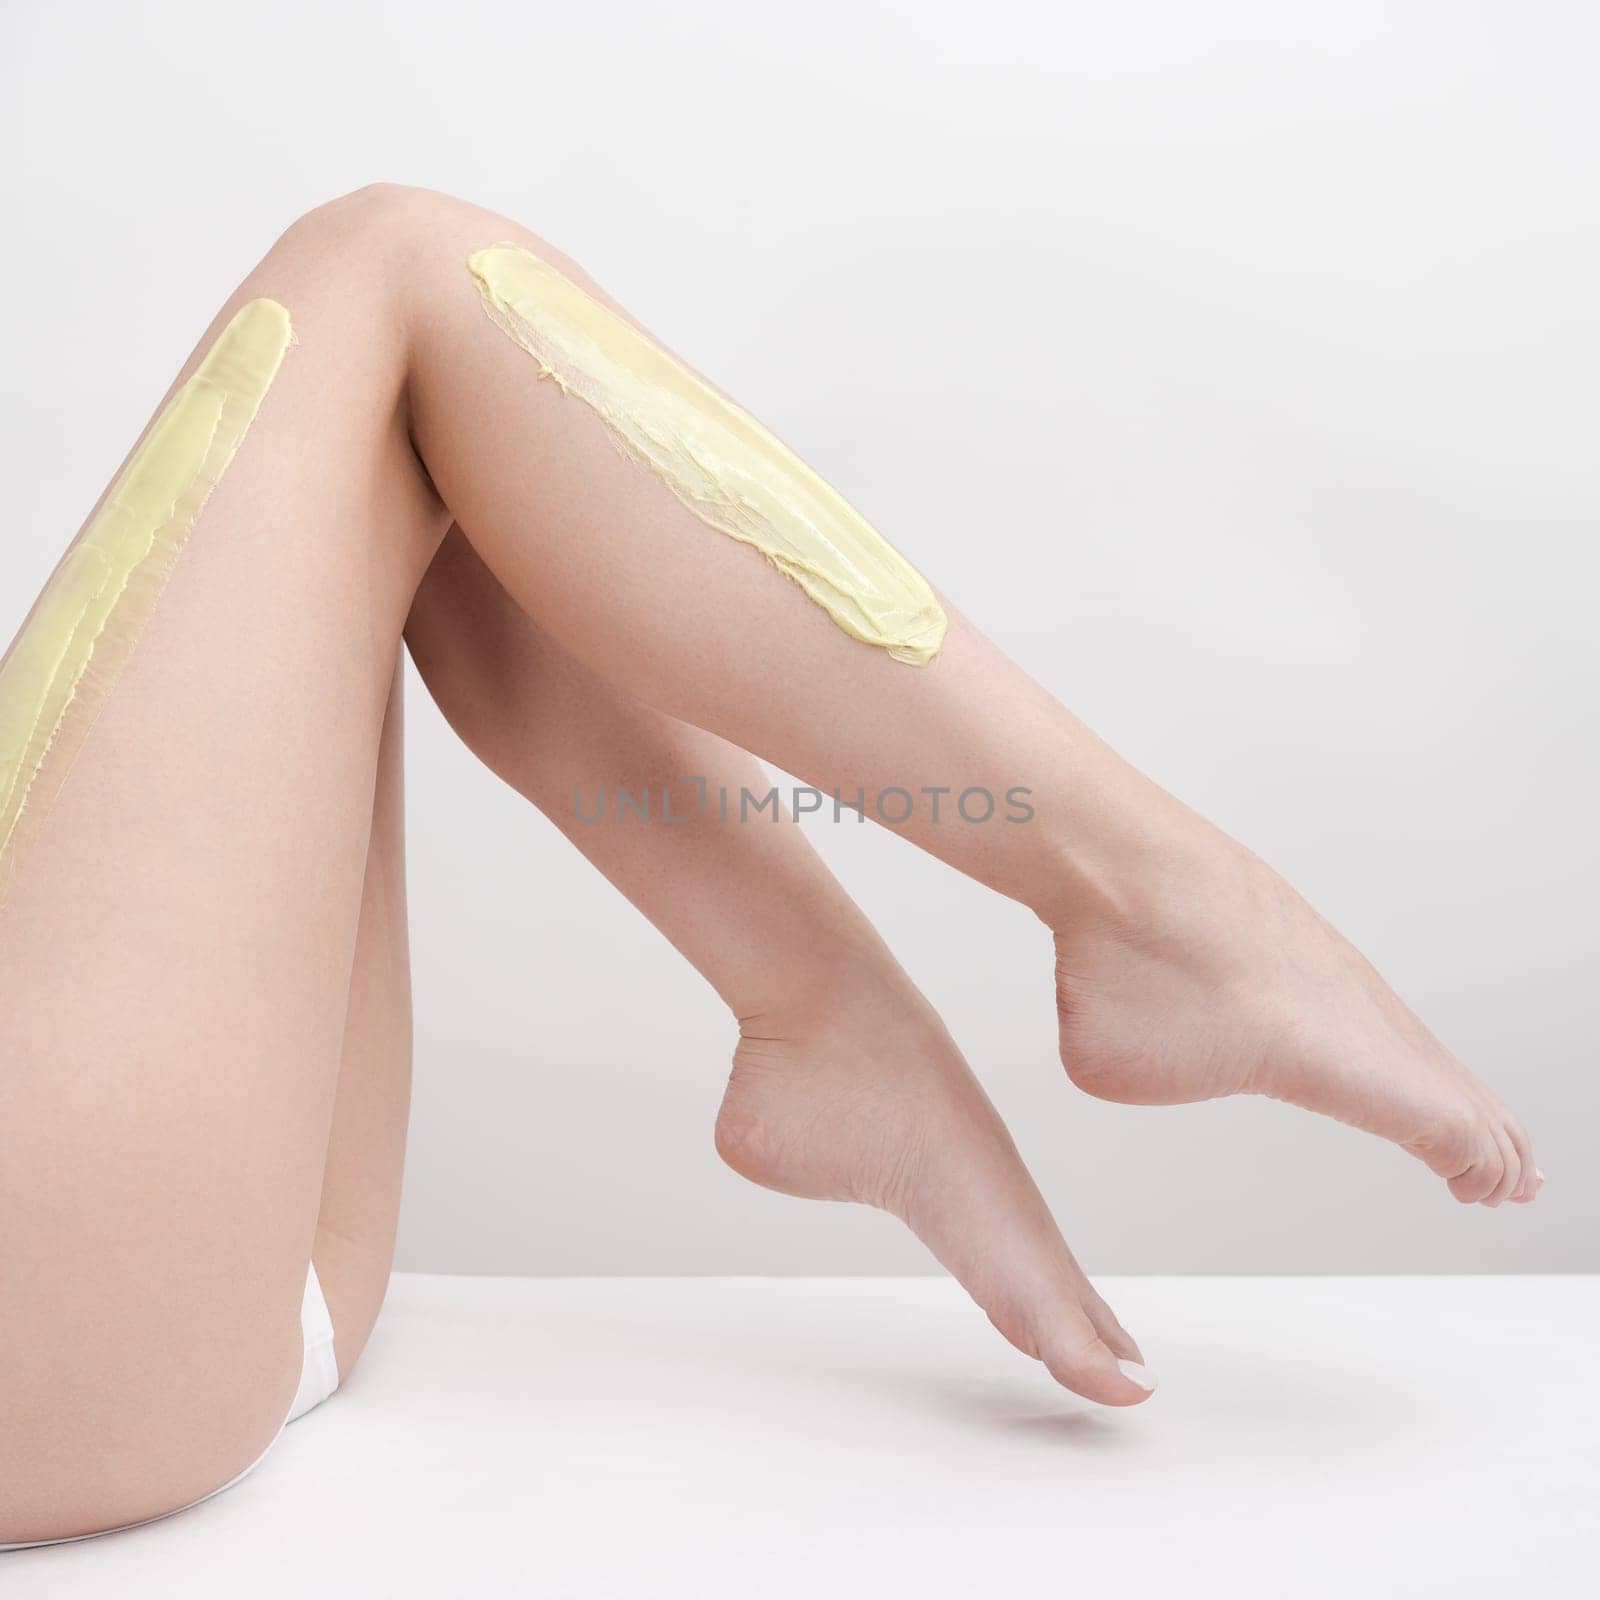 Beautiful legs of slim woman while she lying down on couch during depilation process with green hot wax in professional beauty salon. Side view of body in white panties. Part of photo series.